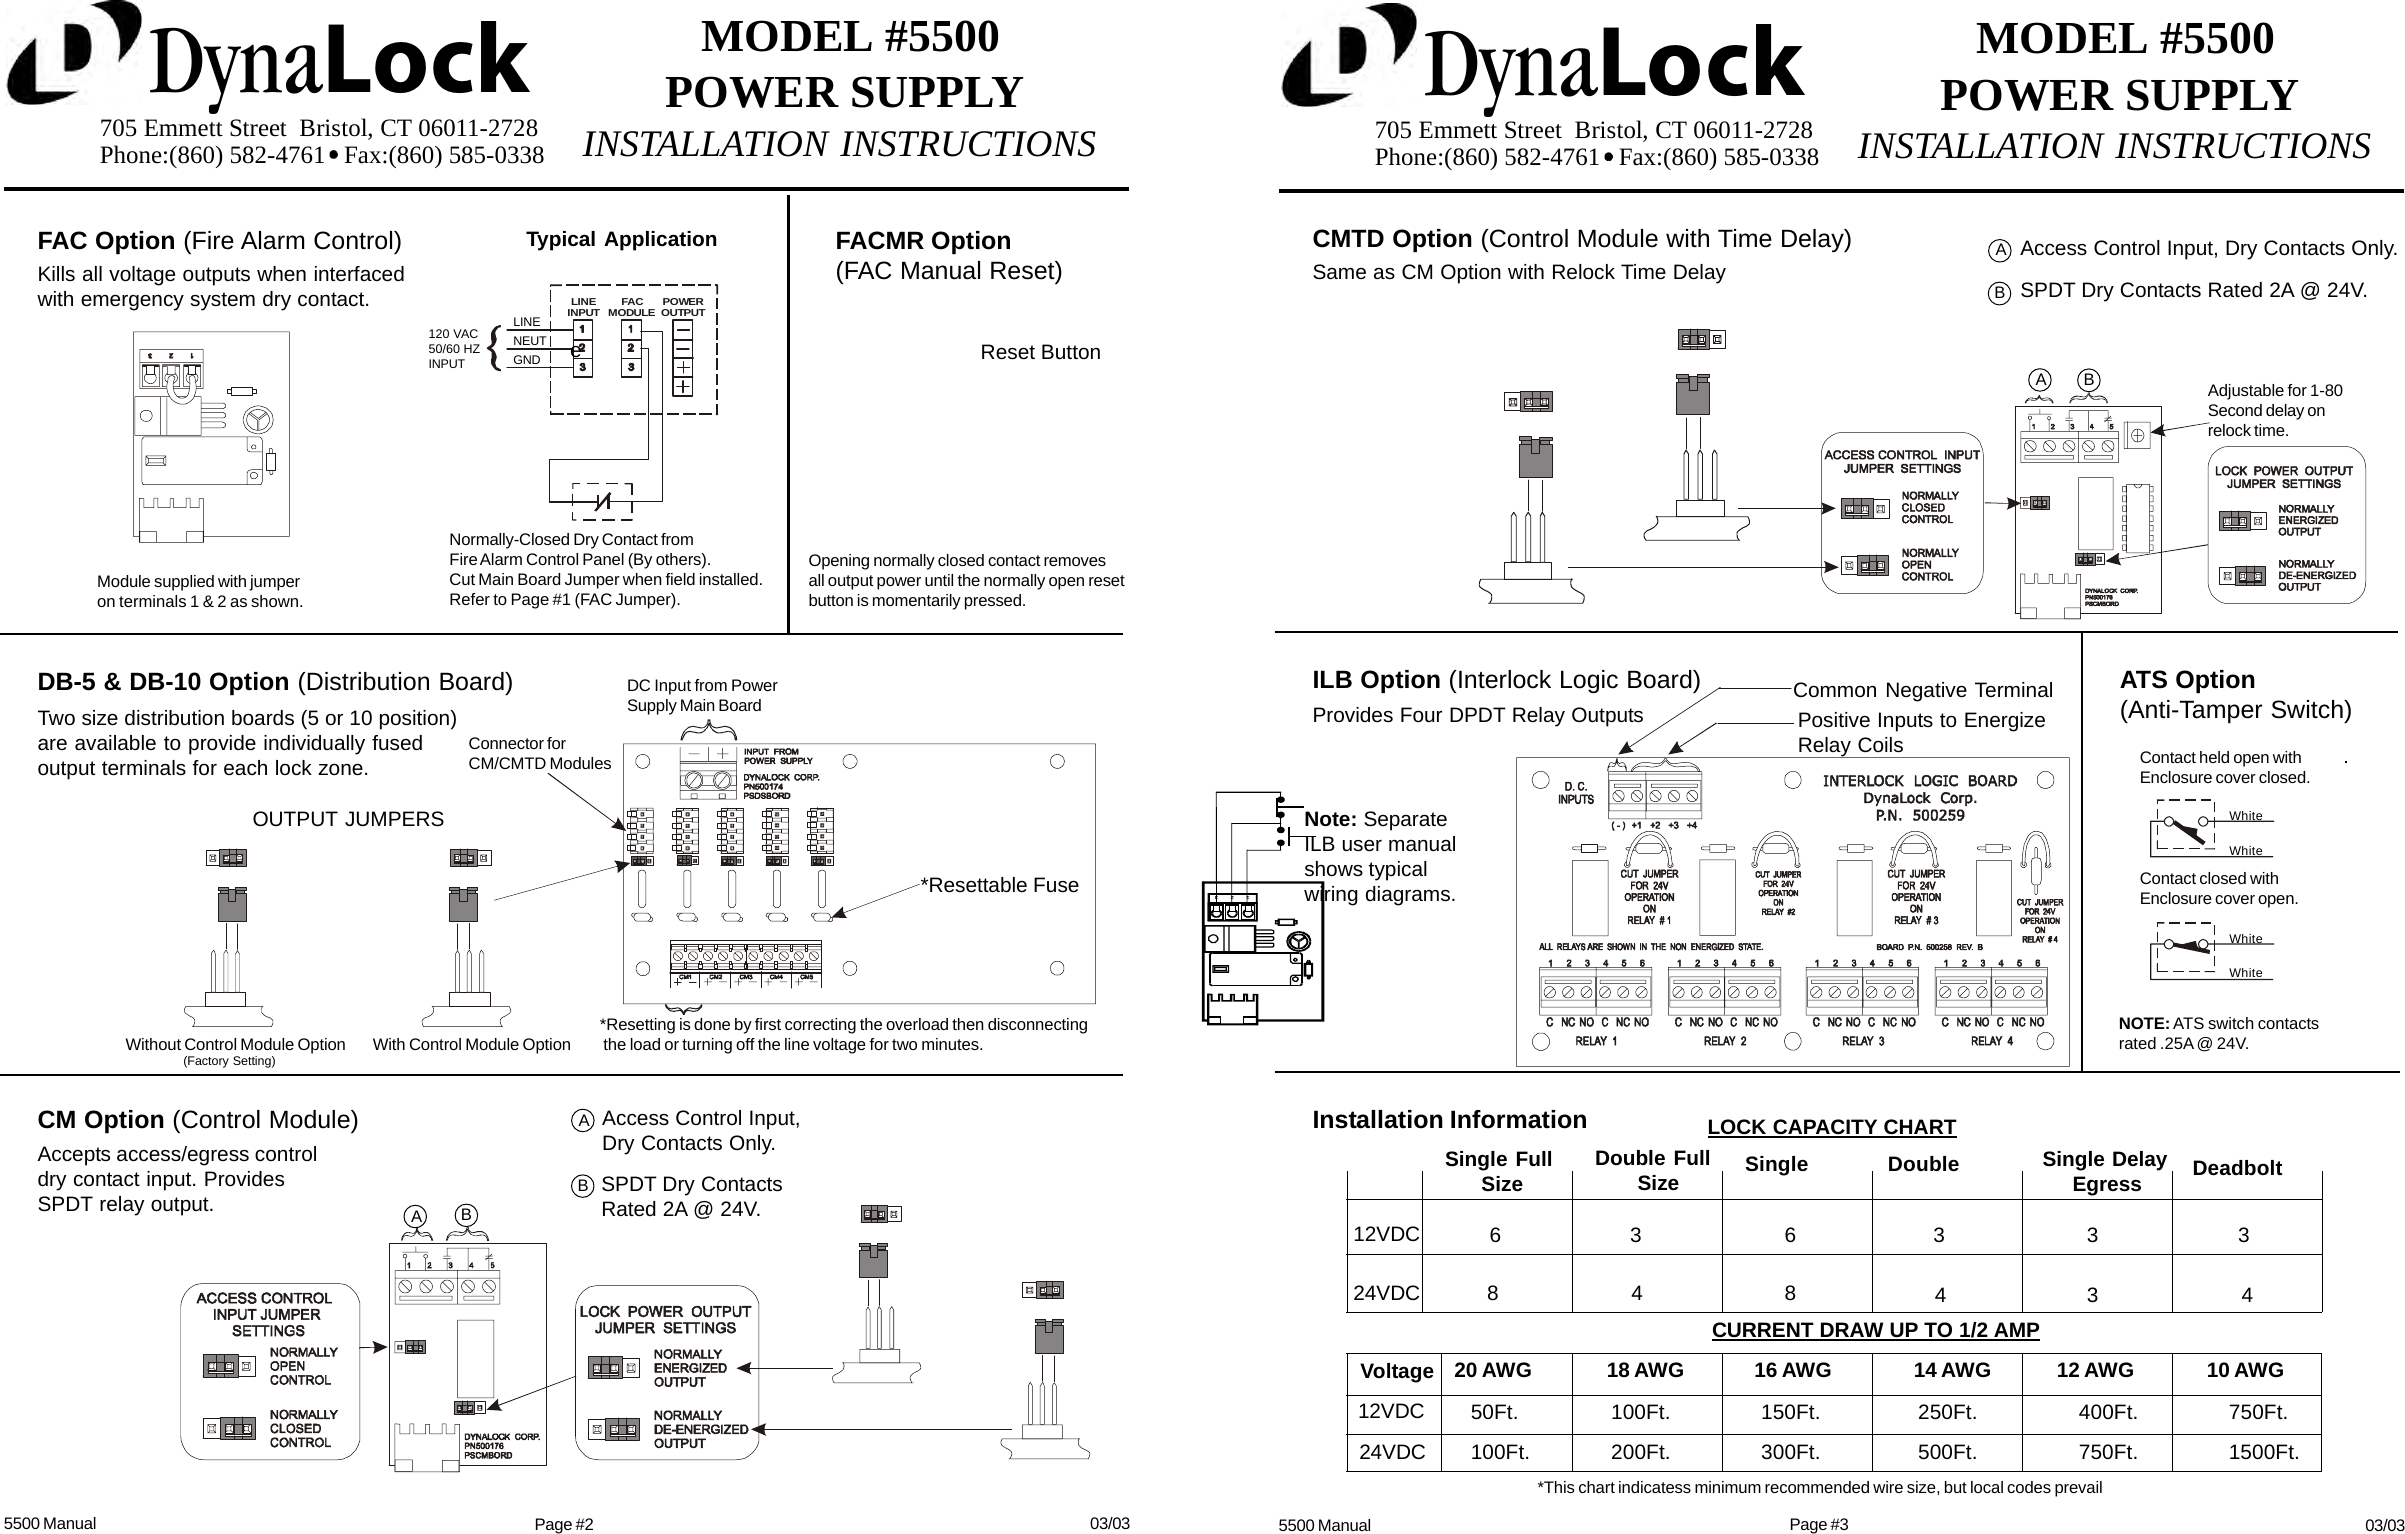 Page 2 of 4 - DynaLock E-Binder 5500 Series Installation Instructions 5500IN